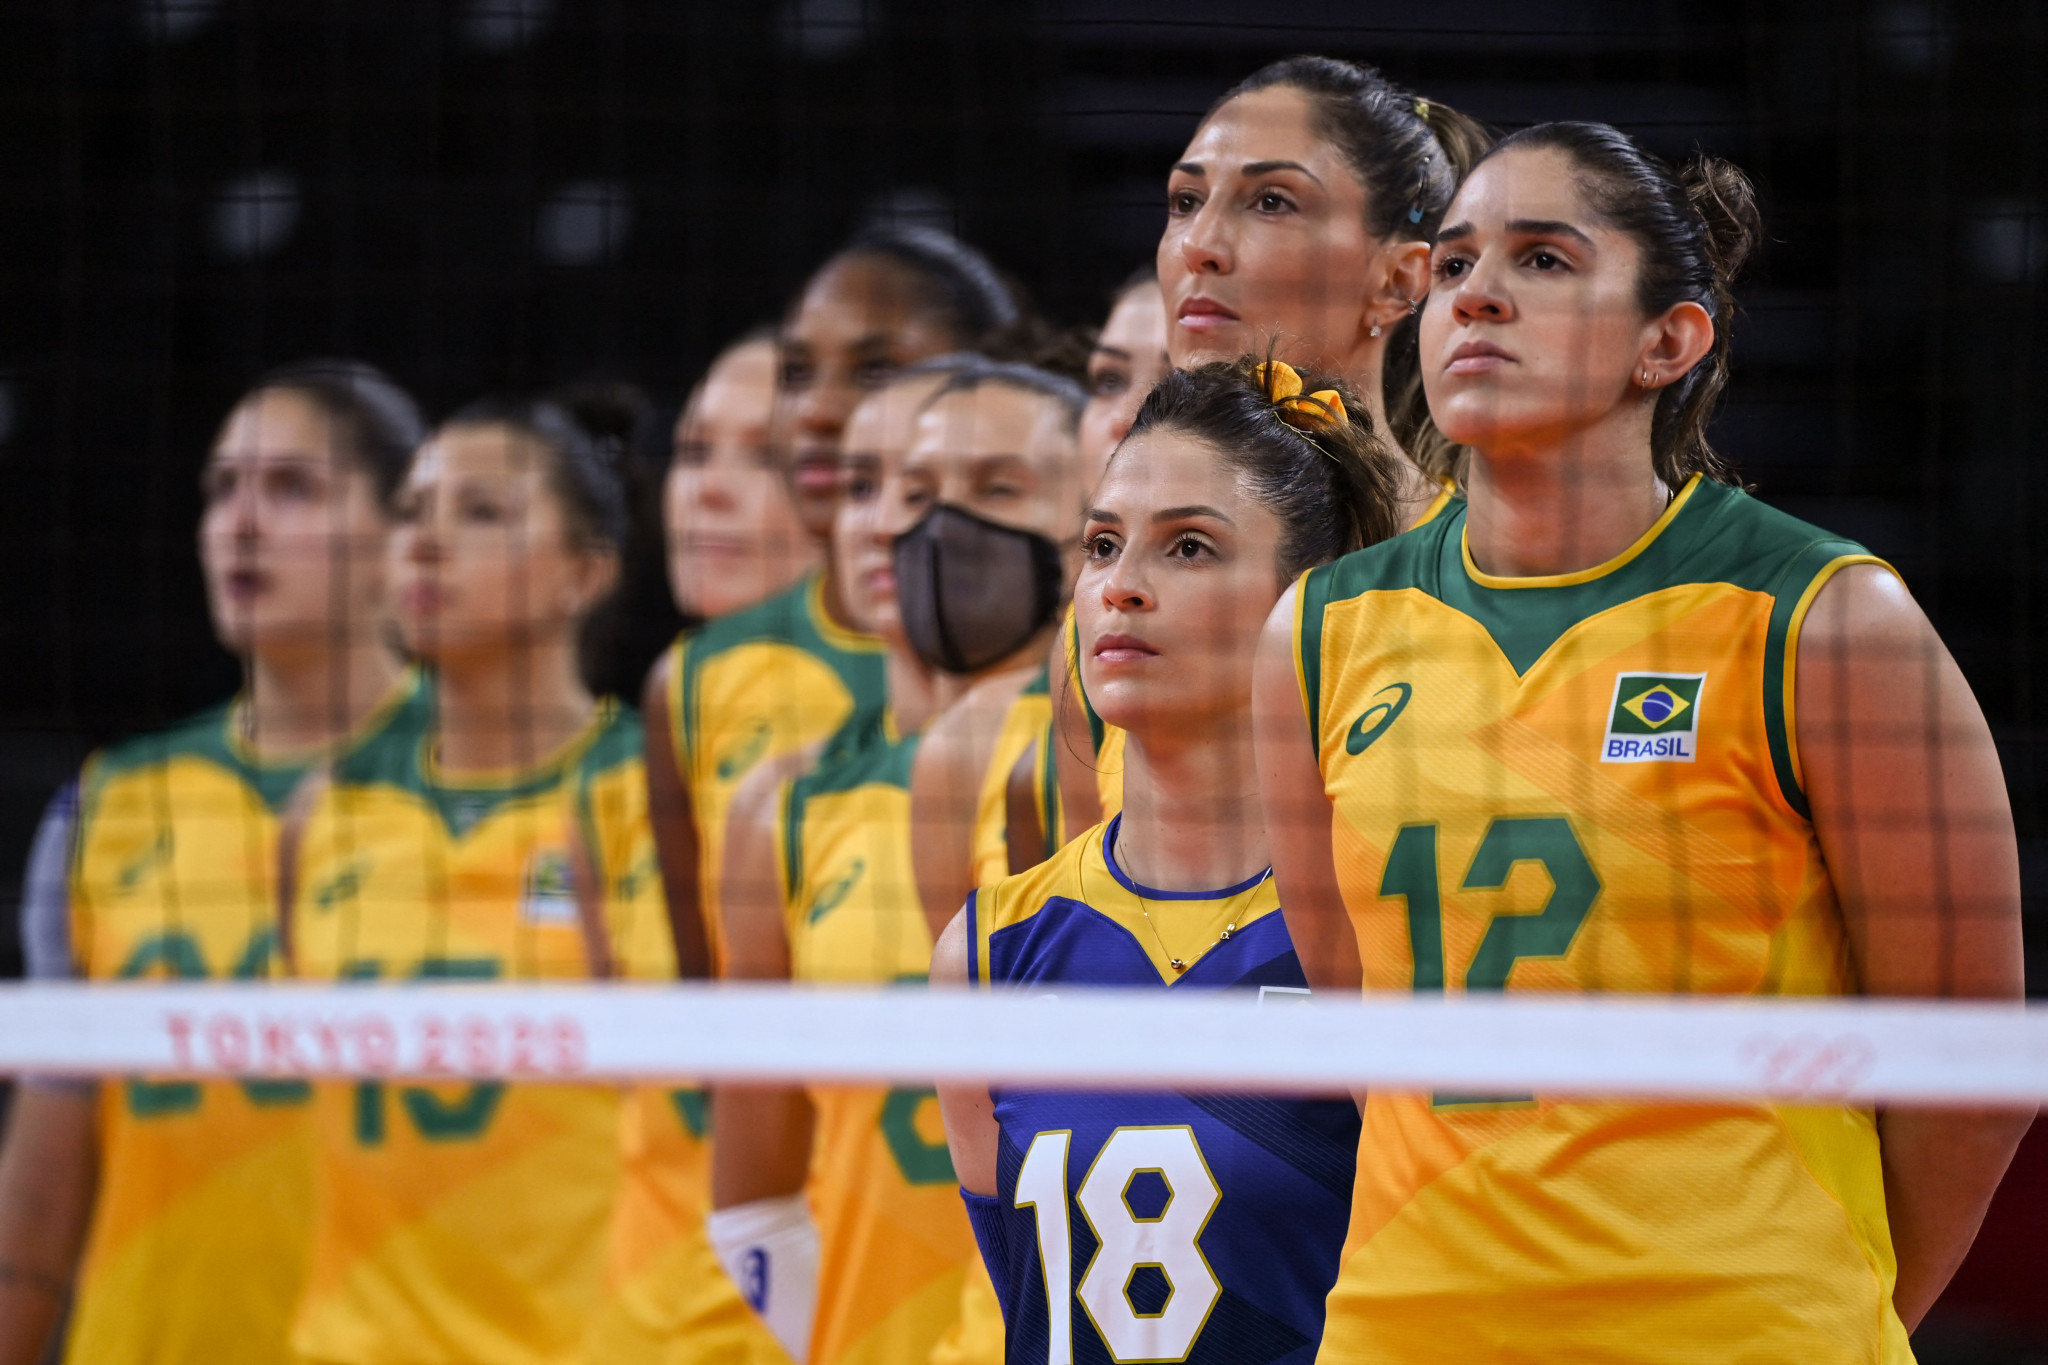 Brazil volleyball teams to train in Moselle before Paris 2024 Olympics